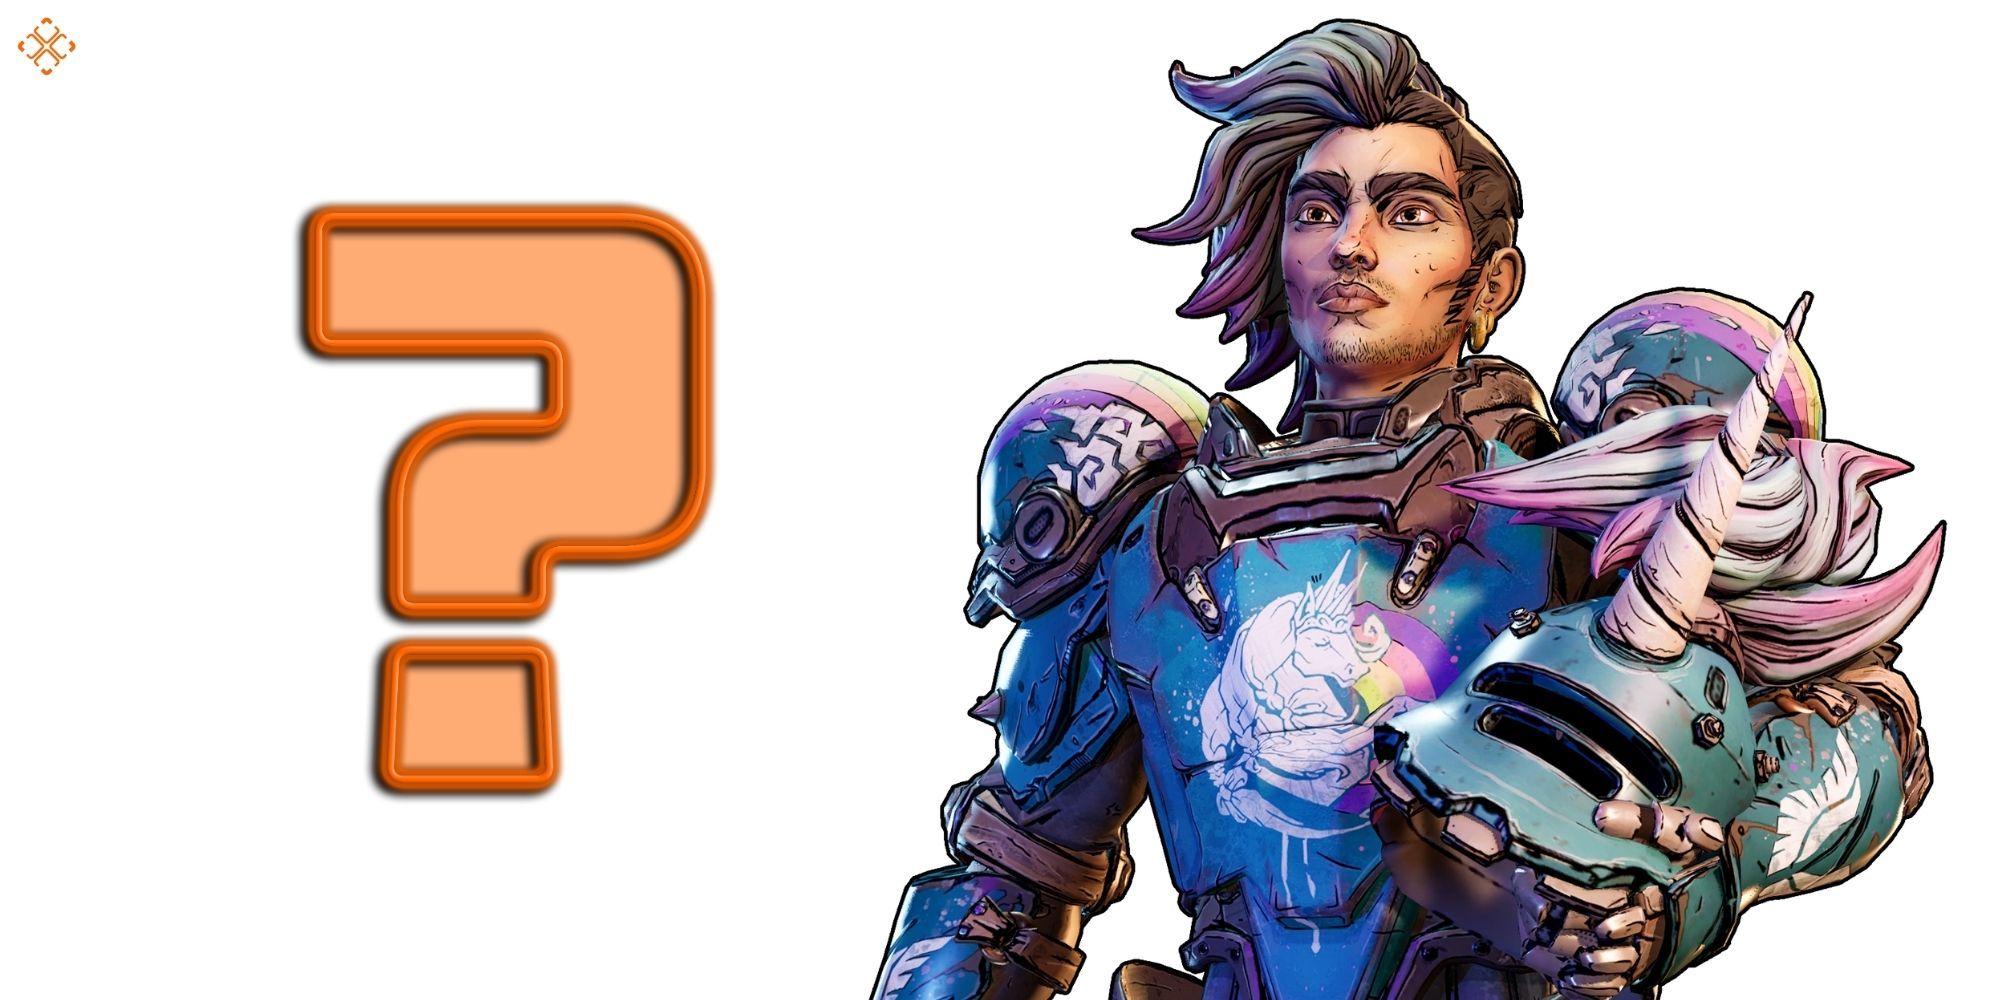 Tiny Tina's Wonderlands Paladin Mike with question mark